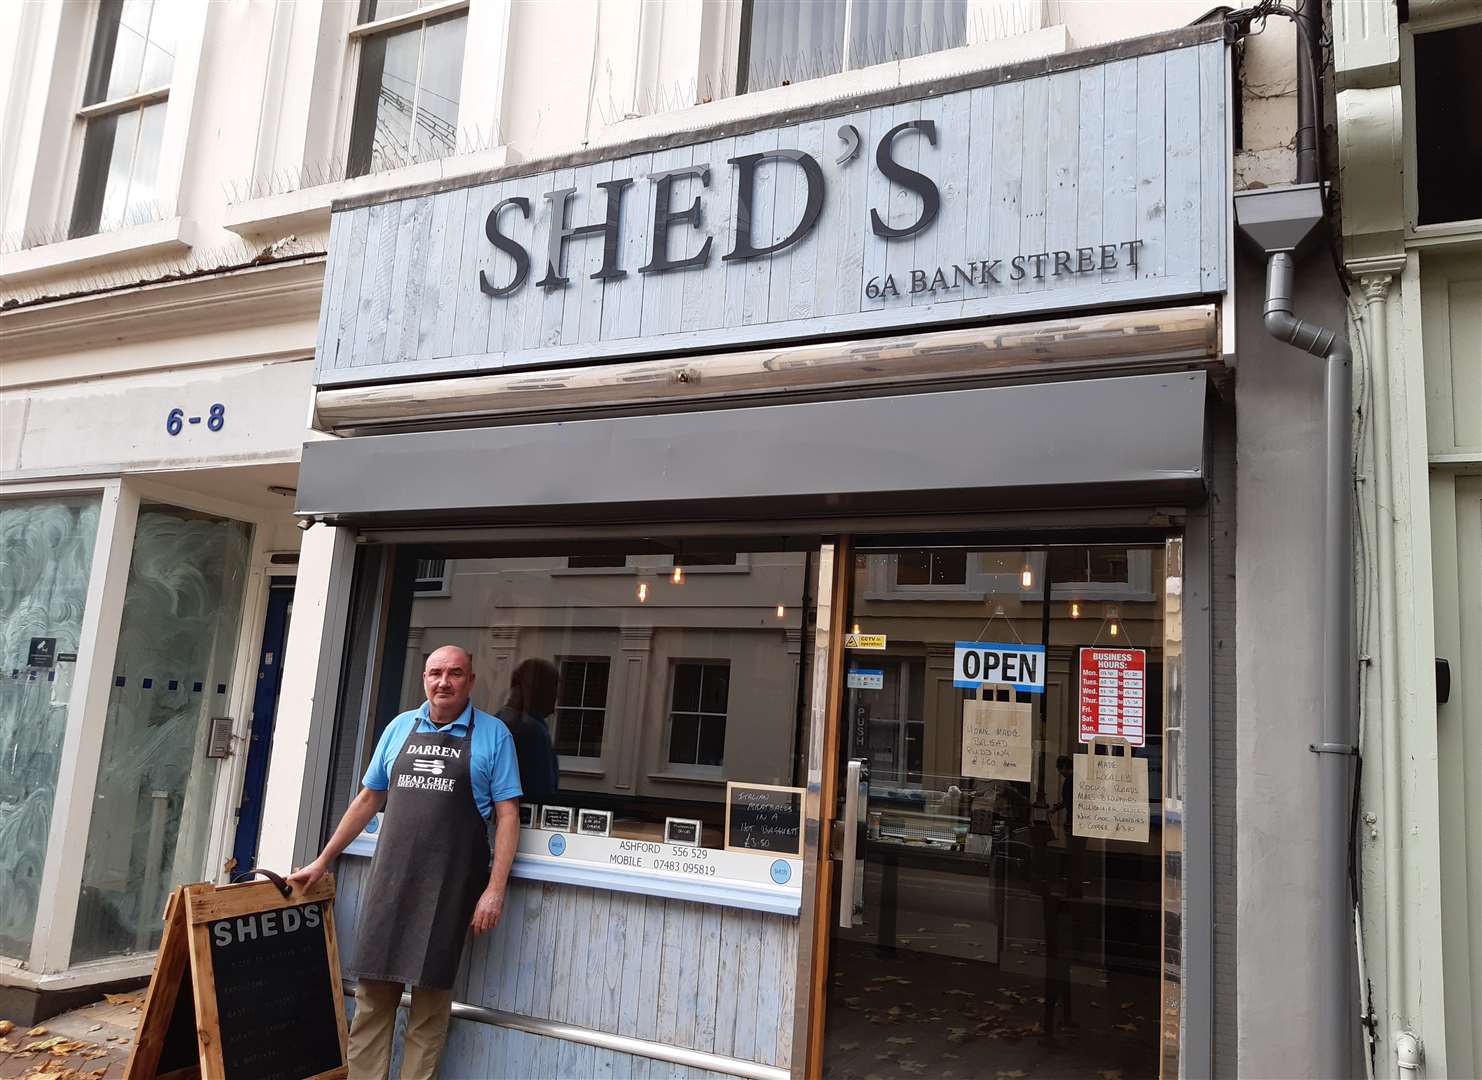 Mr Groves, known as 'Shed', opened his site in Bank Street last month